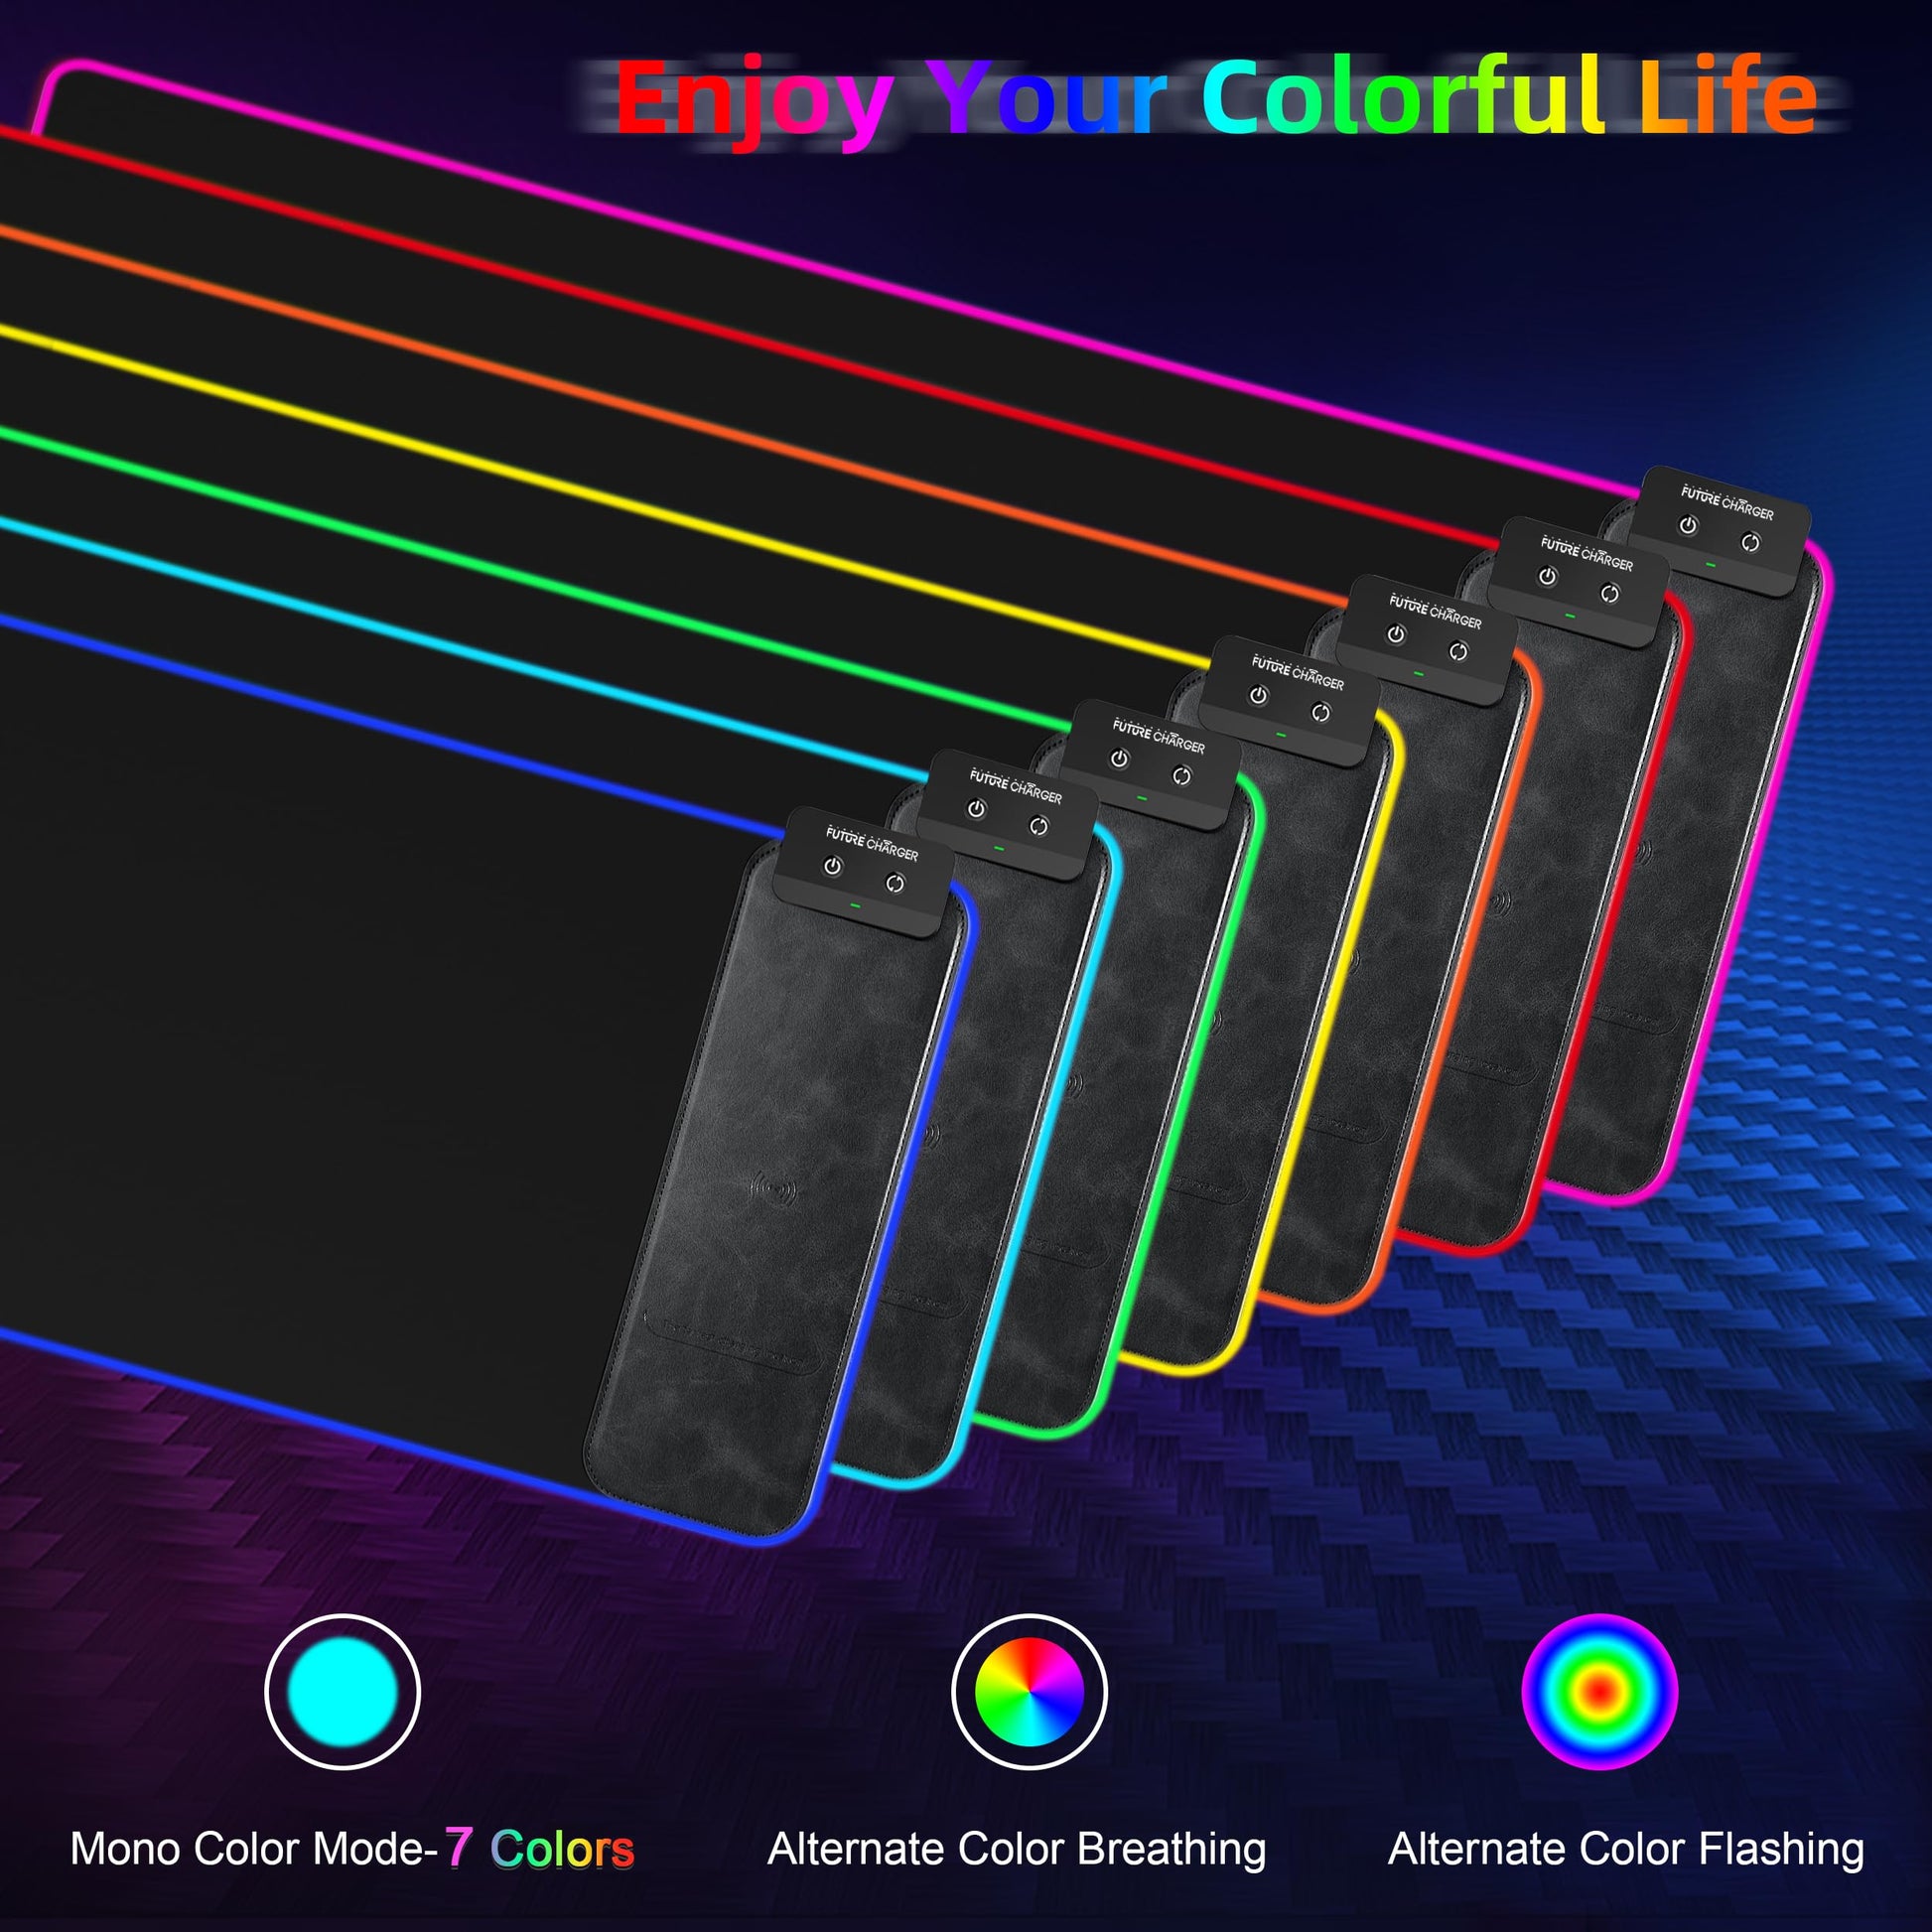 RGB Gaming Mouse Pad with Wireless Charging 10W - 31.5"x11.8" X-Large Desk Mat for Laptop/PC/Keyboard, 9 Light Modes, Non-Slip Rubber Base, Waterproof, Black - amzGamess